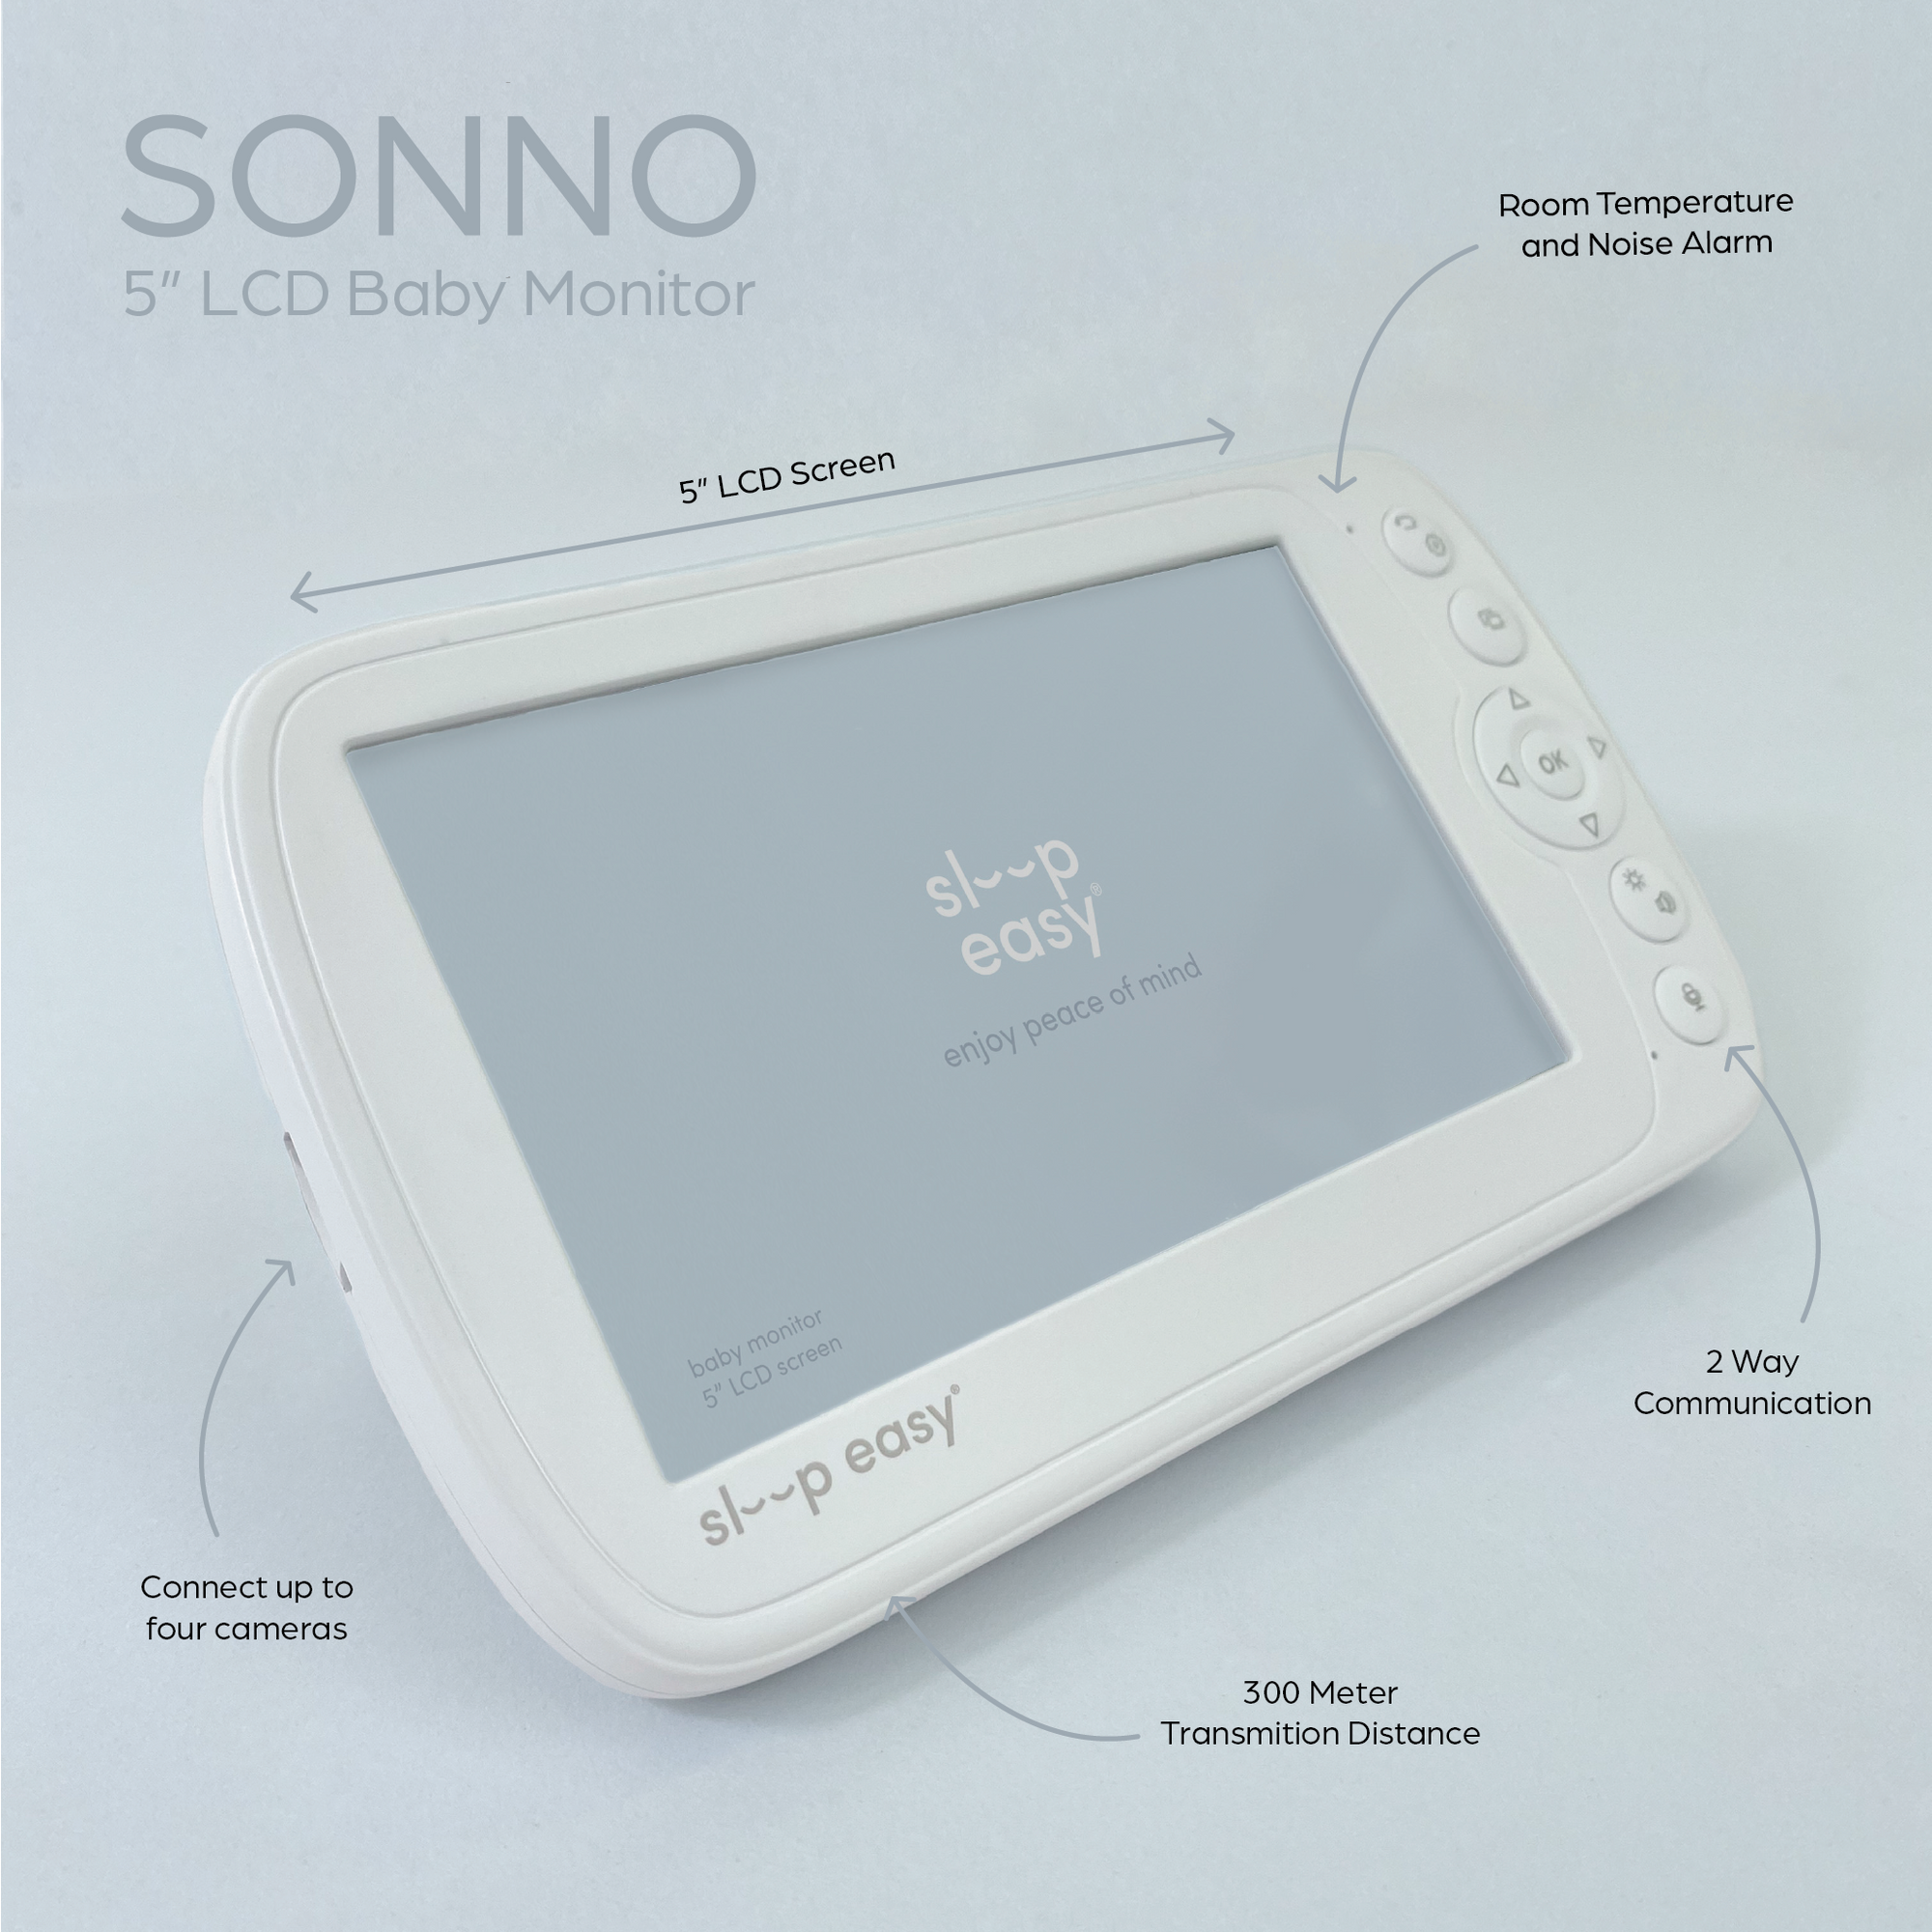 Sonno - 5"/12.7cm Crystal Clear Baby Monitor